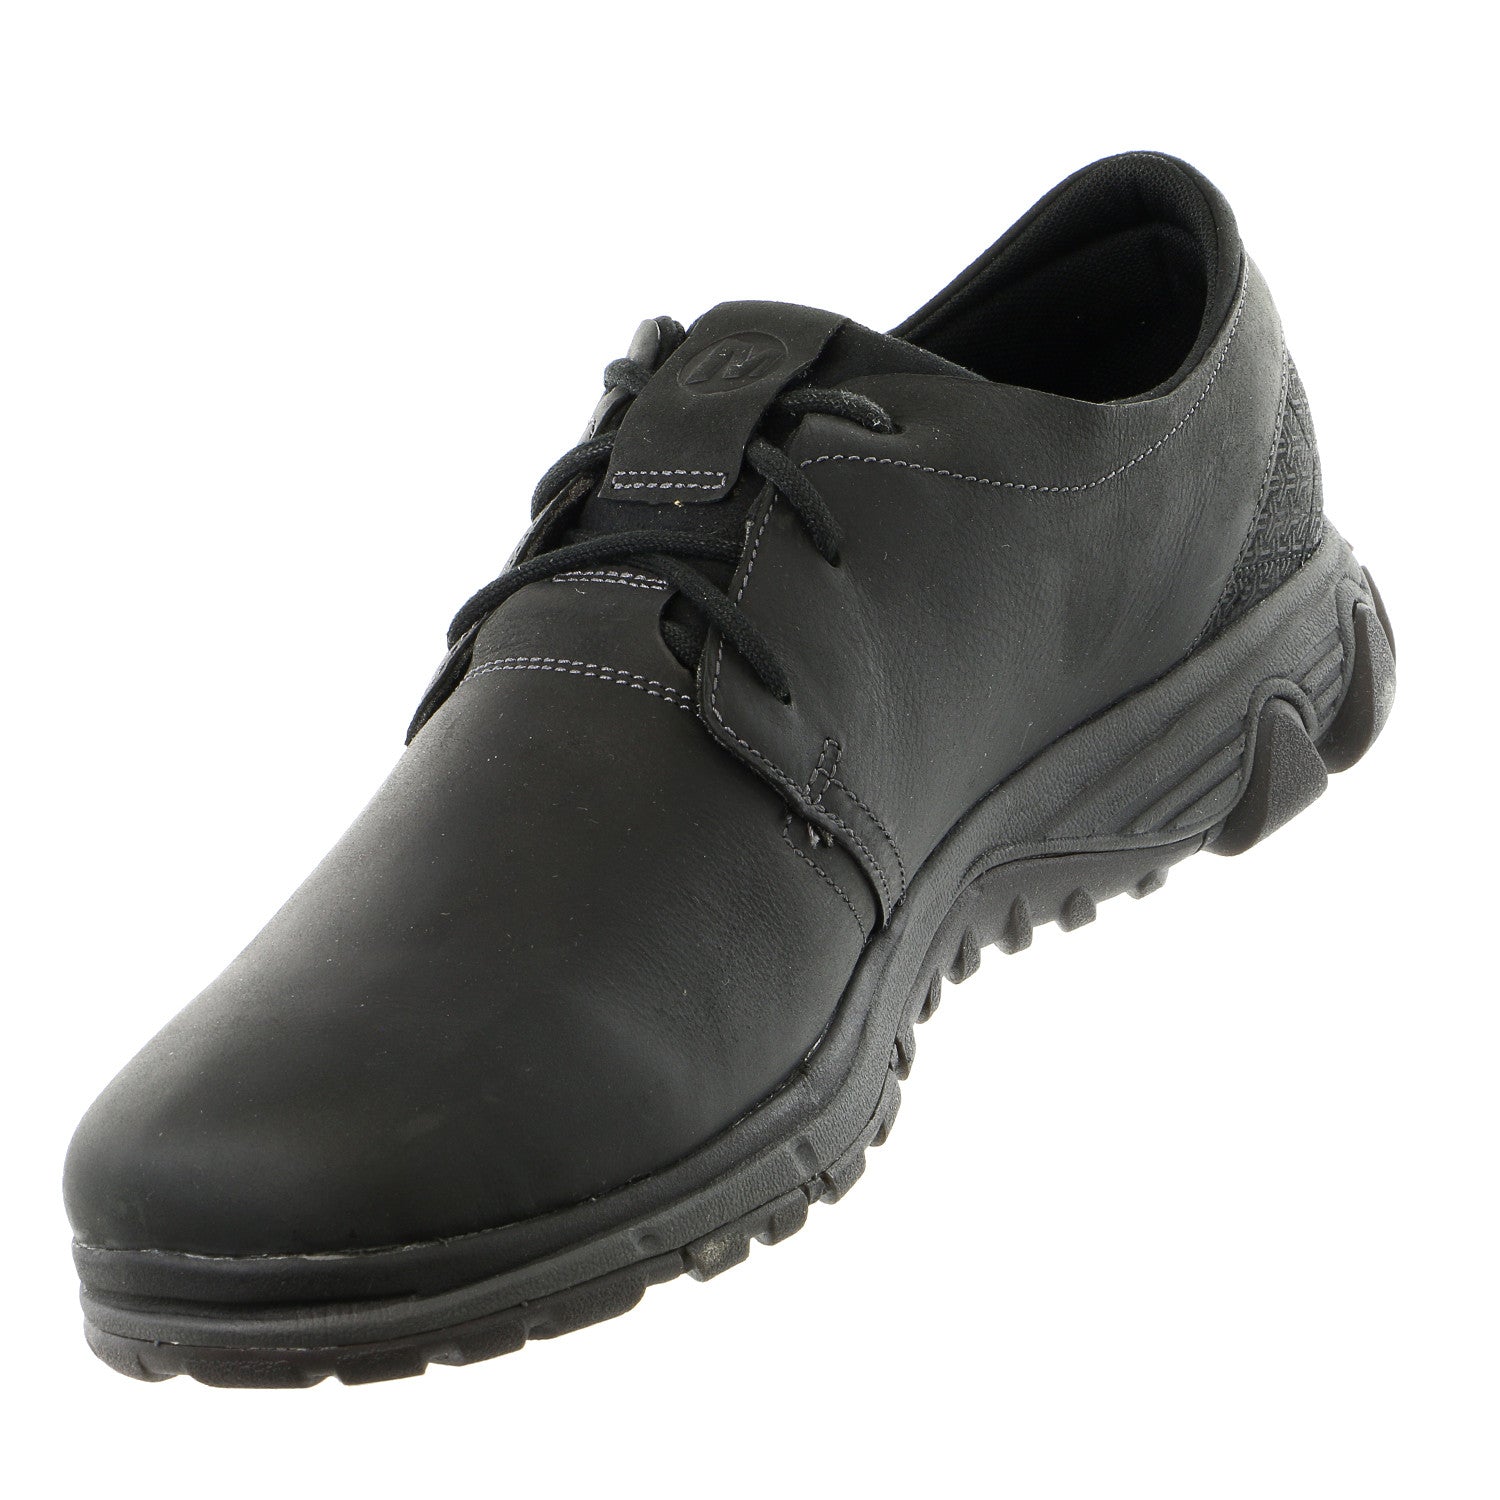 Merrell All Out Blazer Leather Oxford Shoe - - Shoplifestyle